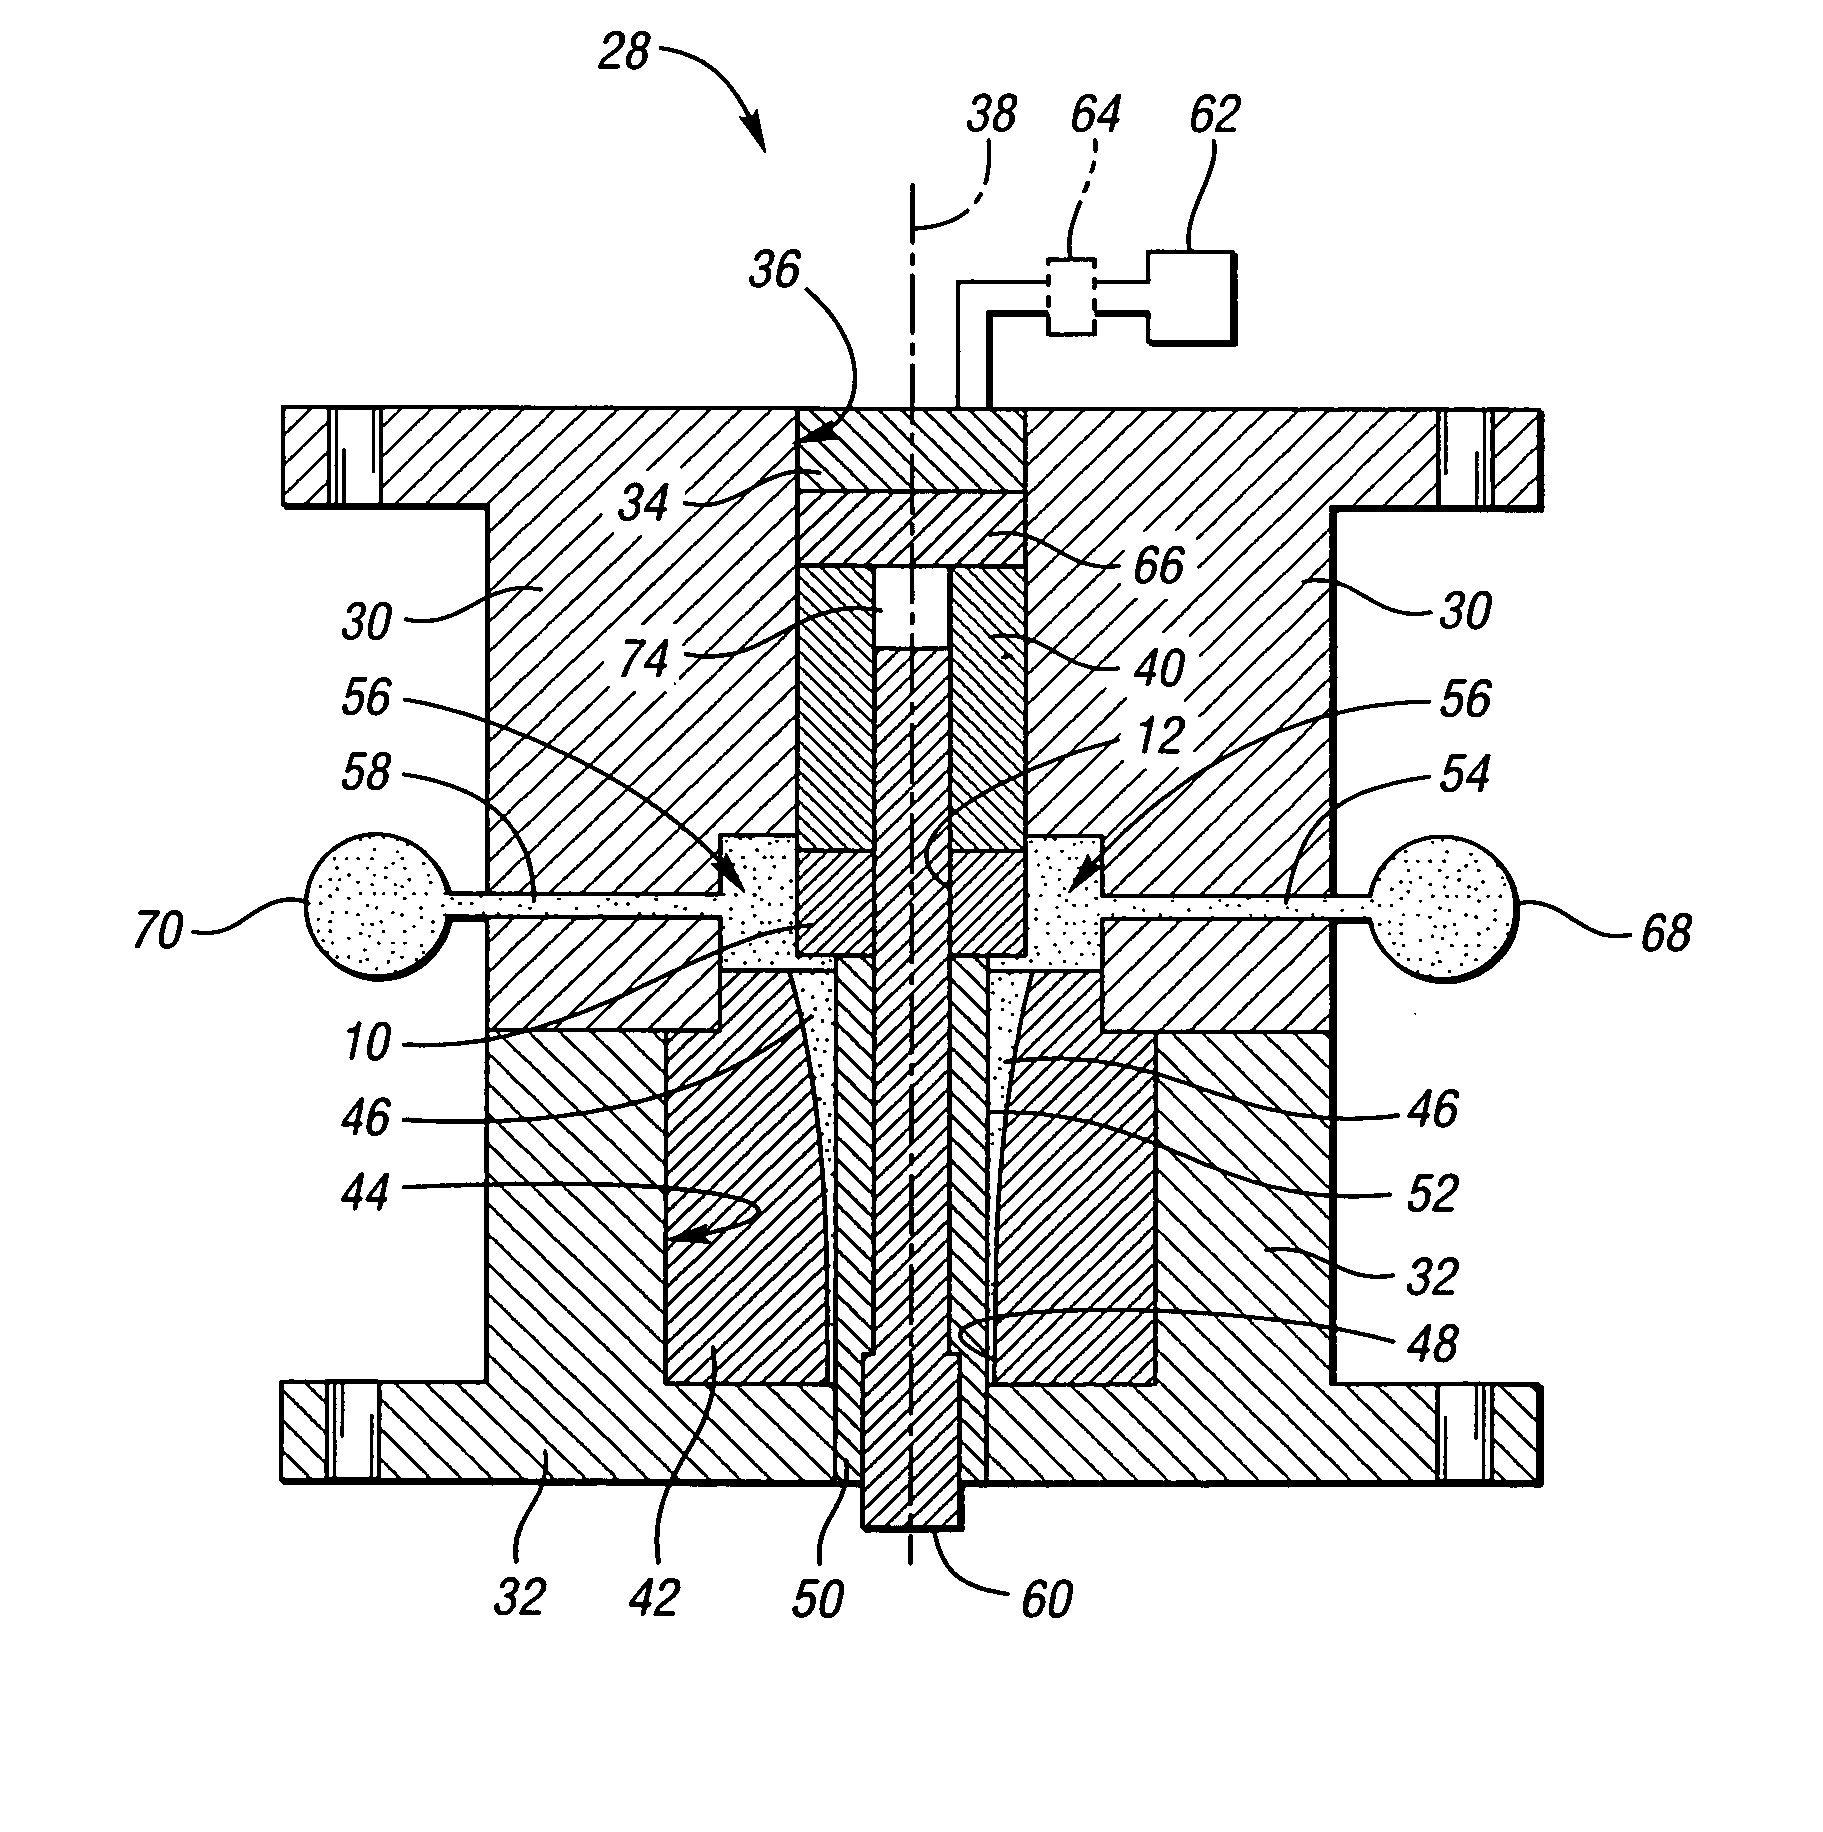 Method of net-forming an article and apparatus for same